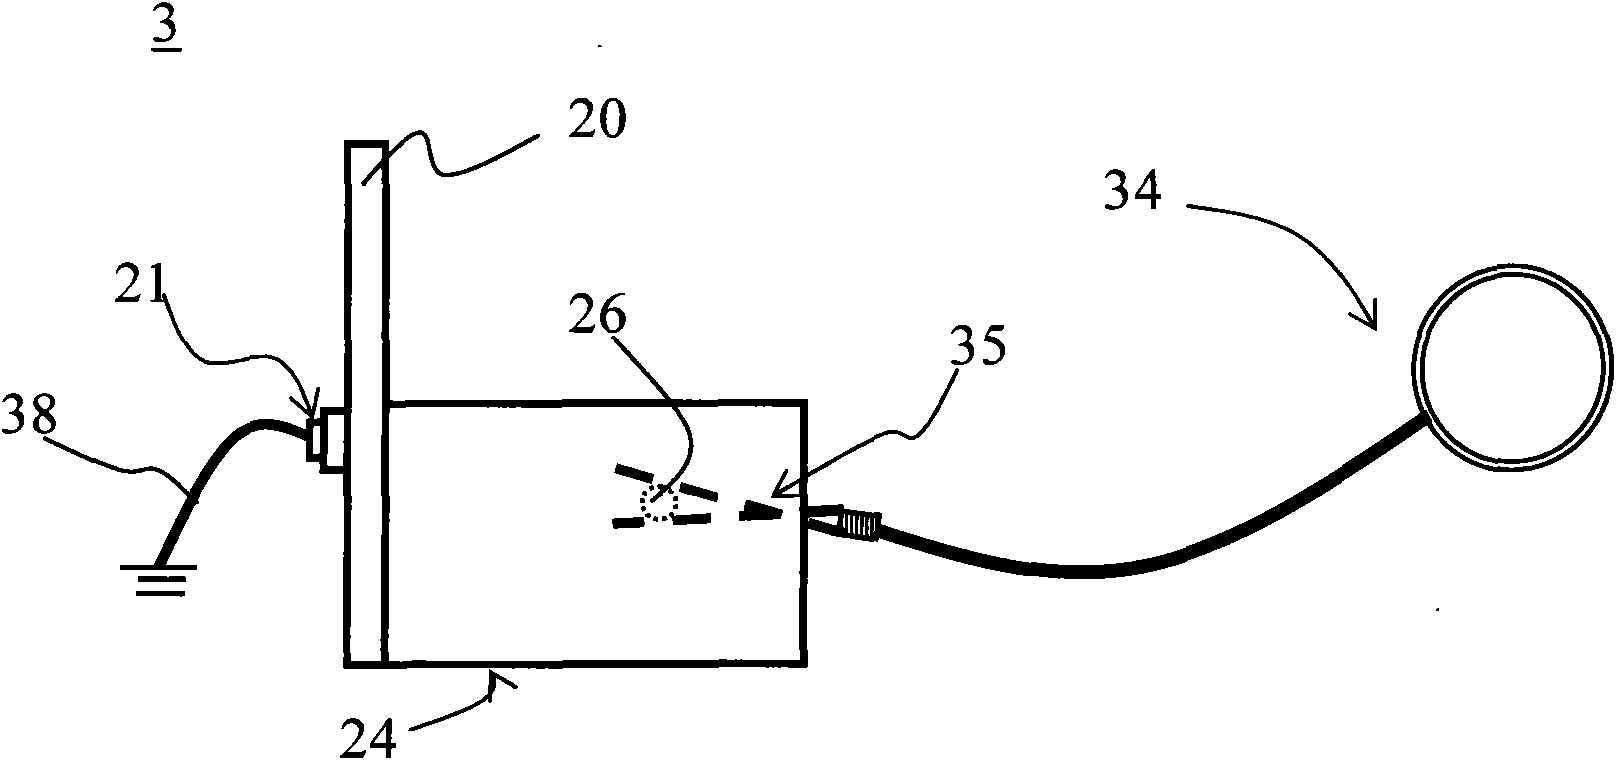 Conductive holder and anti-static device